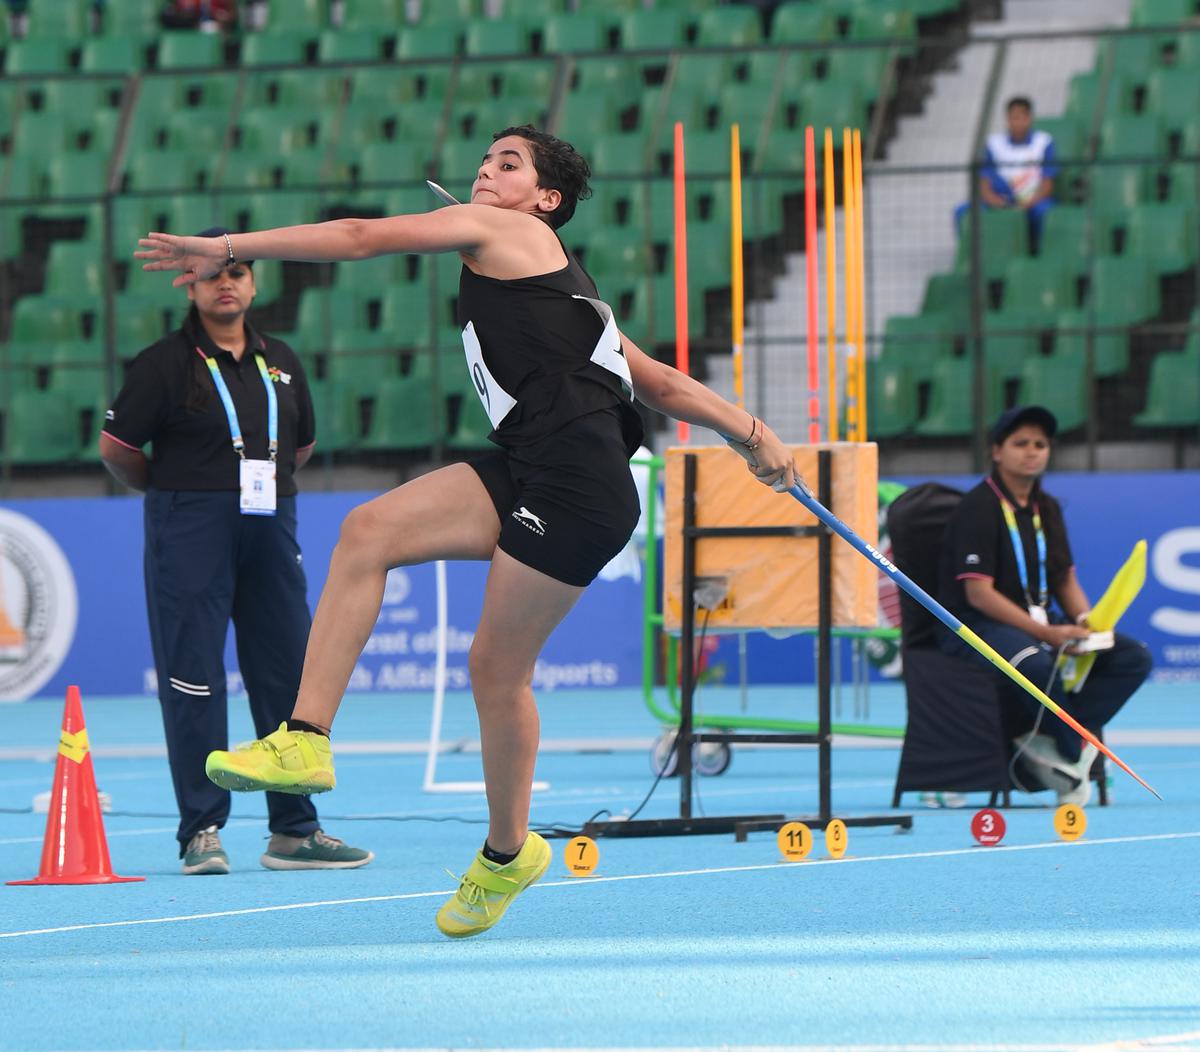 Deepika of Haryana wins the girls’ javelin throw gold with a new meet record in the Khelo India Youth Games at Jawaharlal Nehru stadium in Chennai on Thursday.